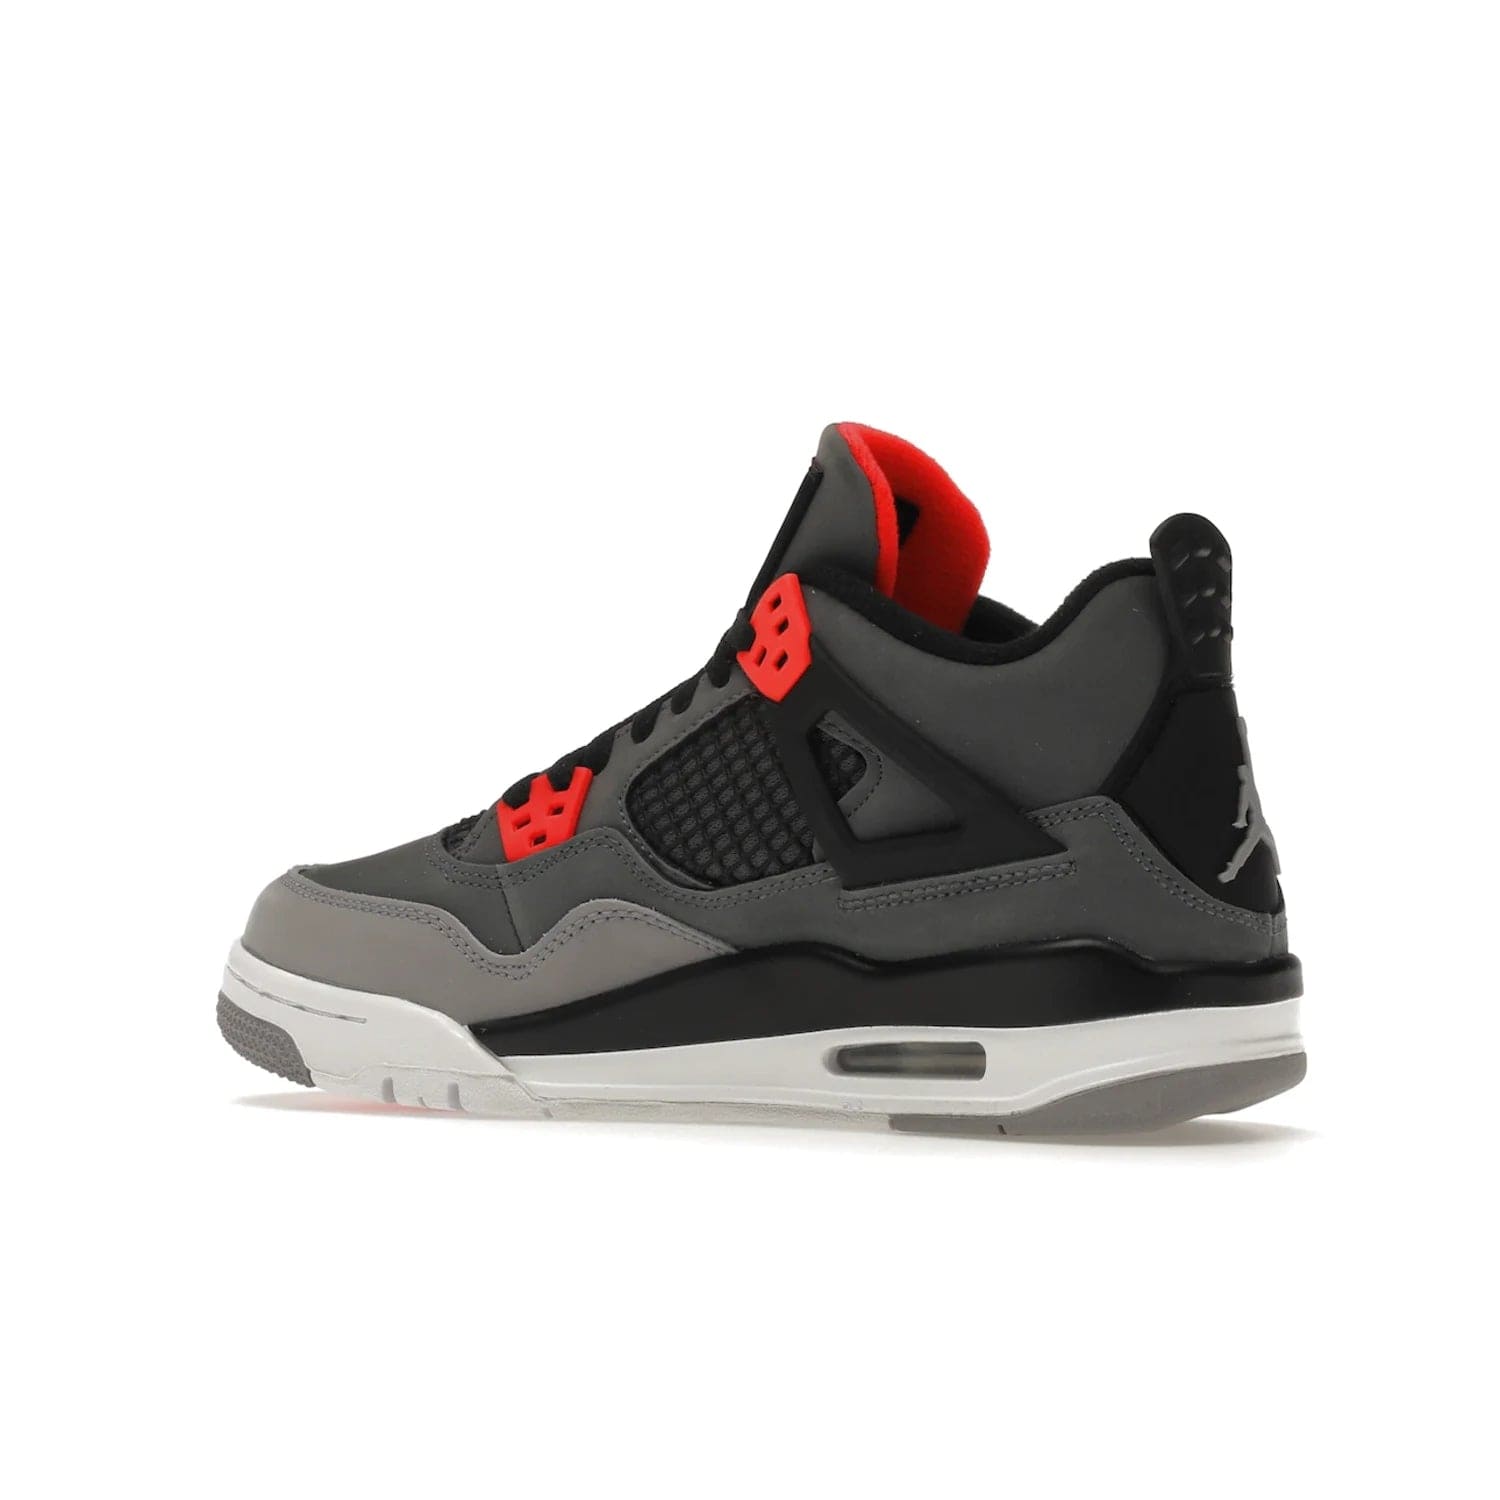 Jordan 4 Retro Infrared (GS) - Image 22 - Only at www.BallersClubKickz.com - Shop the Air Jordan 4 Retro Infrared (GS) for a classic silhouette with subtle yet bold features. Dark grey nubuck upper with lighter forefoot overlay, black accents, Infrared molded eyelets & woven tongue tag. Available June 2022.